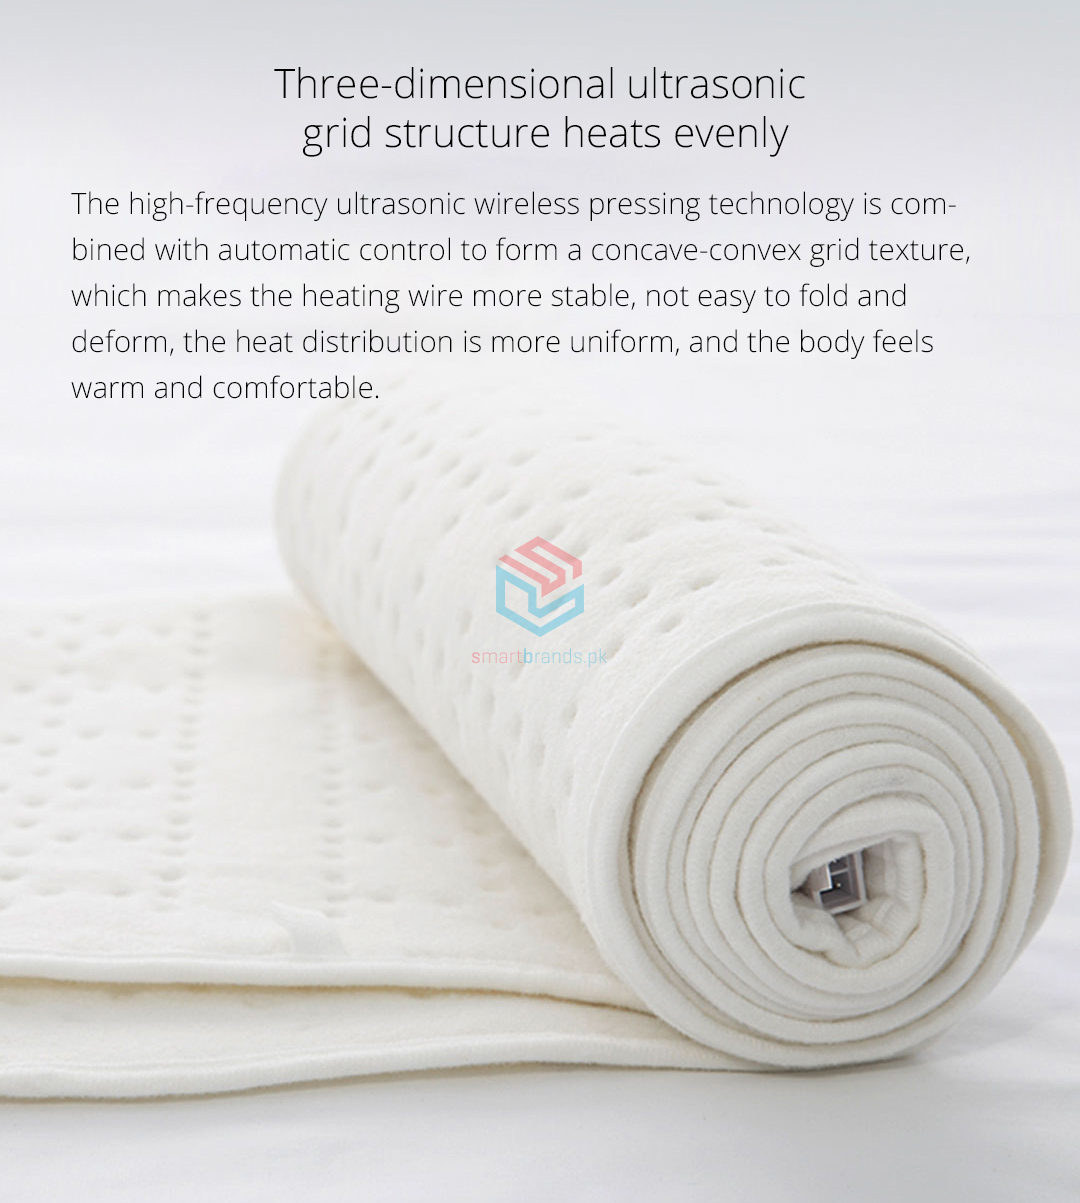 The high-frequency ultrasonic wireless pressing technology is combined with automatic control to form a concave-convex grid texture, which makes the heating wire more stable, not easy to fold and deform, the heat distribution is more uniform, and the body feels warm and comfortable.